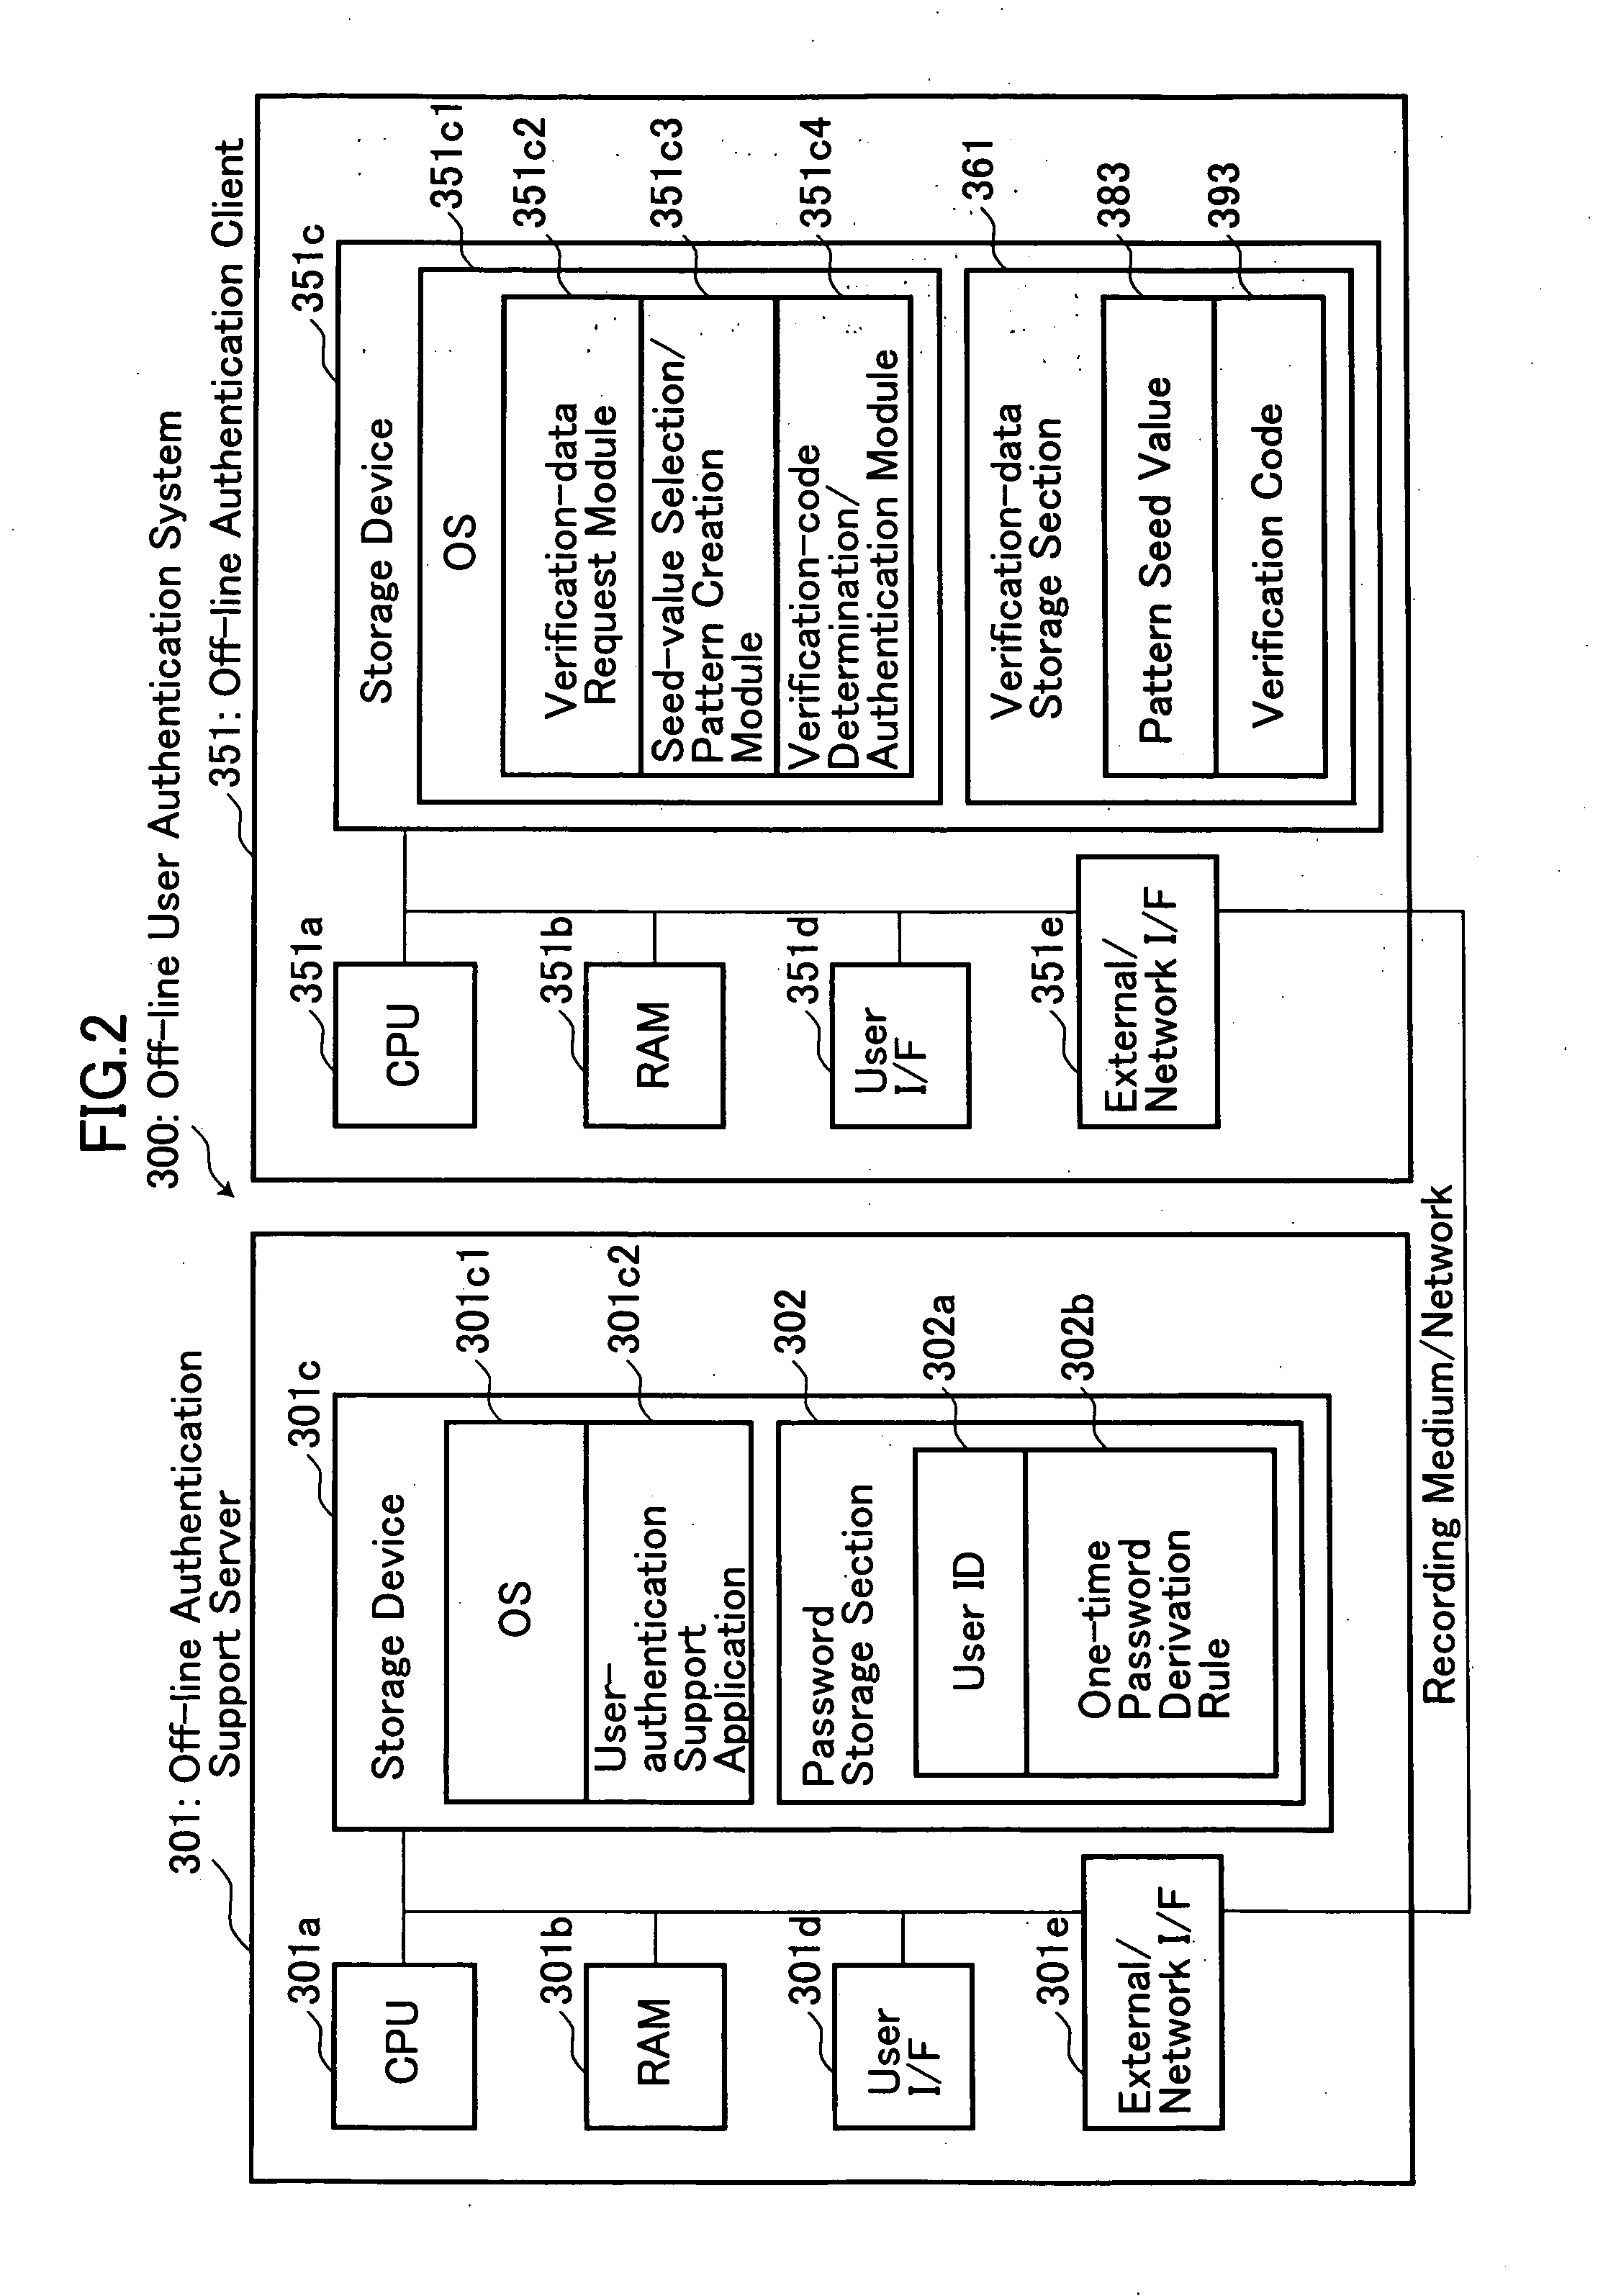 System, method and program for off-line user authentication